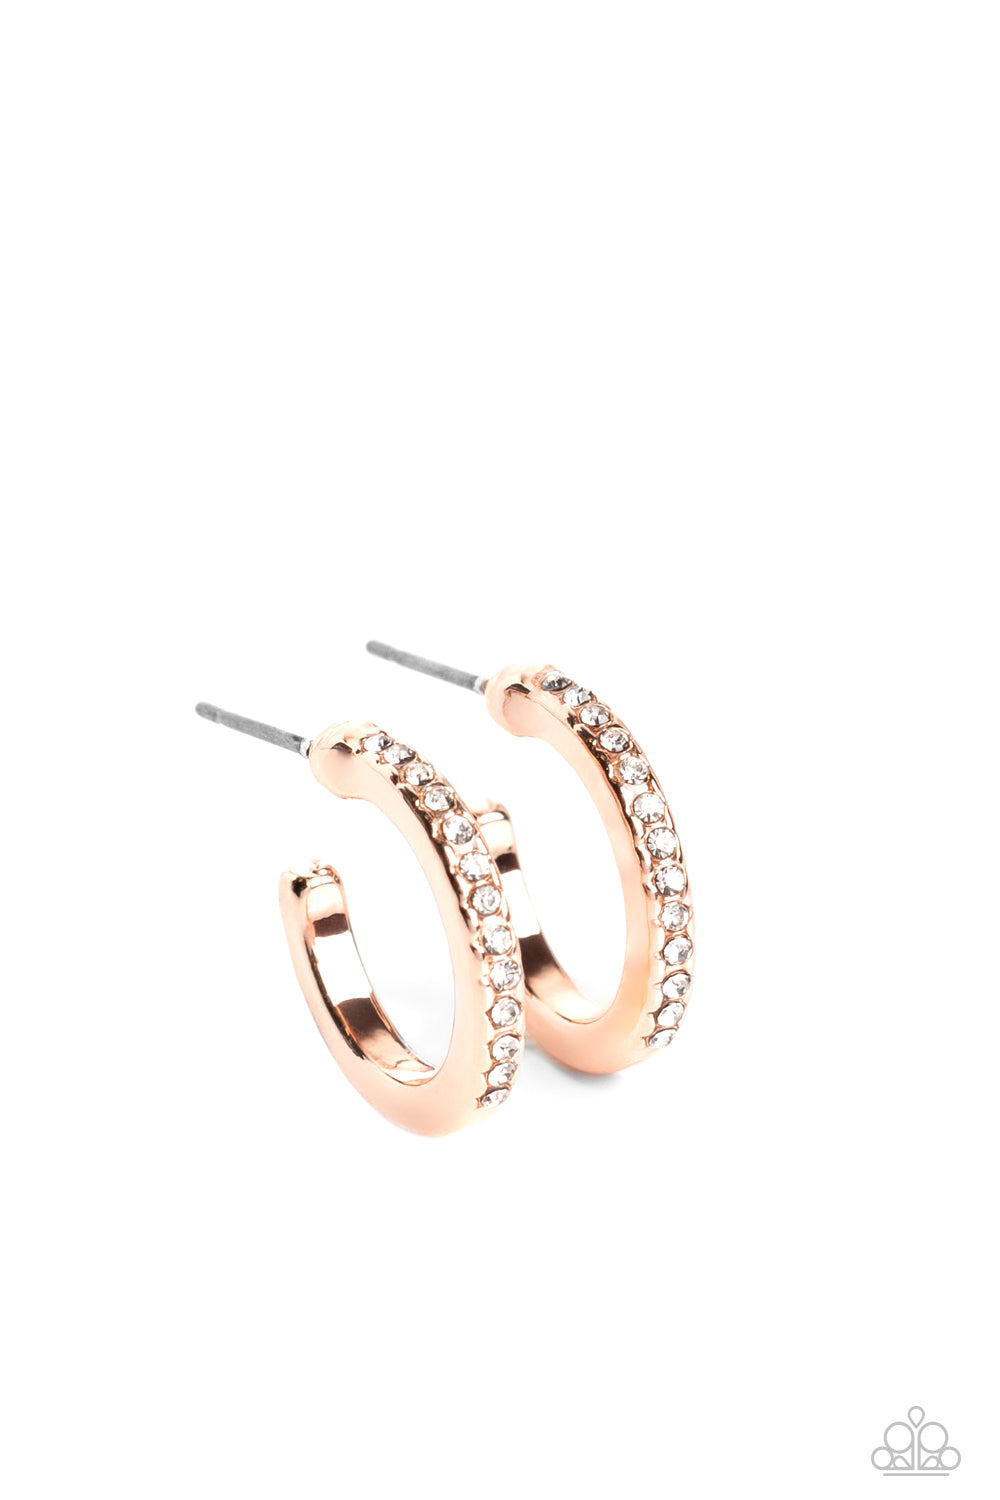 Audaciously Angelic - Rose Gold Earring - Paparazzi - Dare2bdazzlin N Jewelry